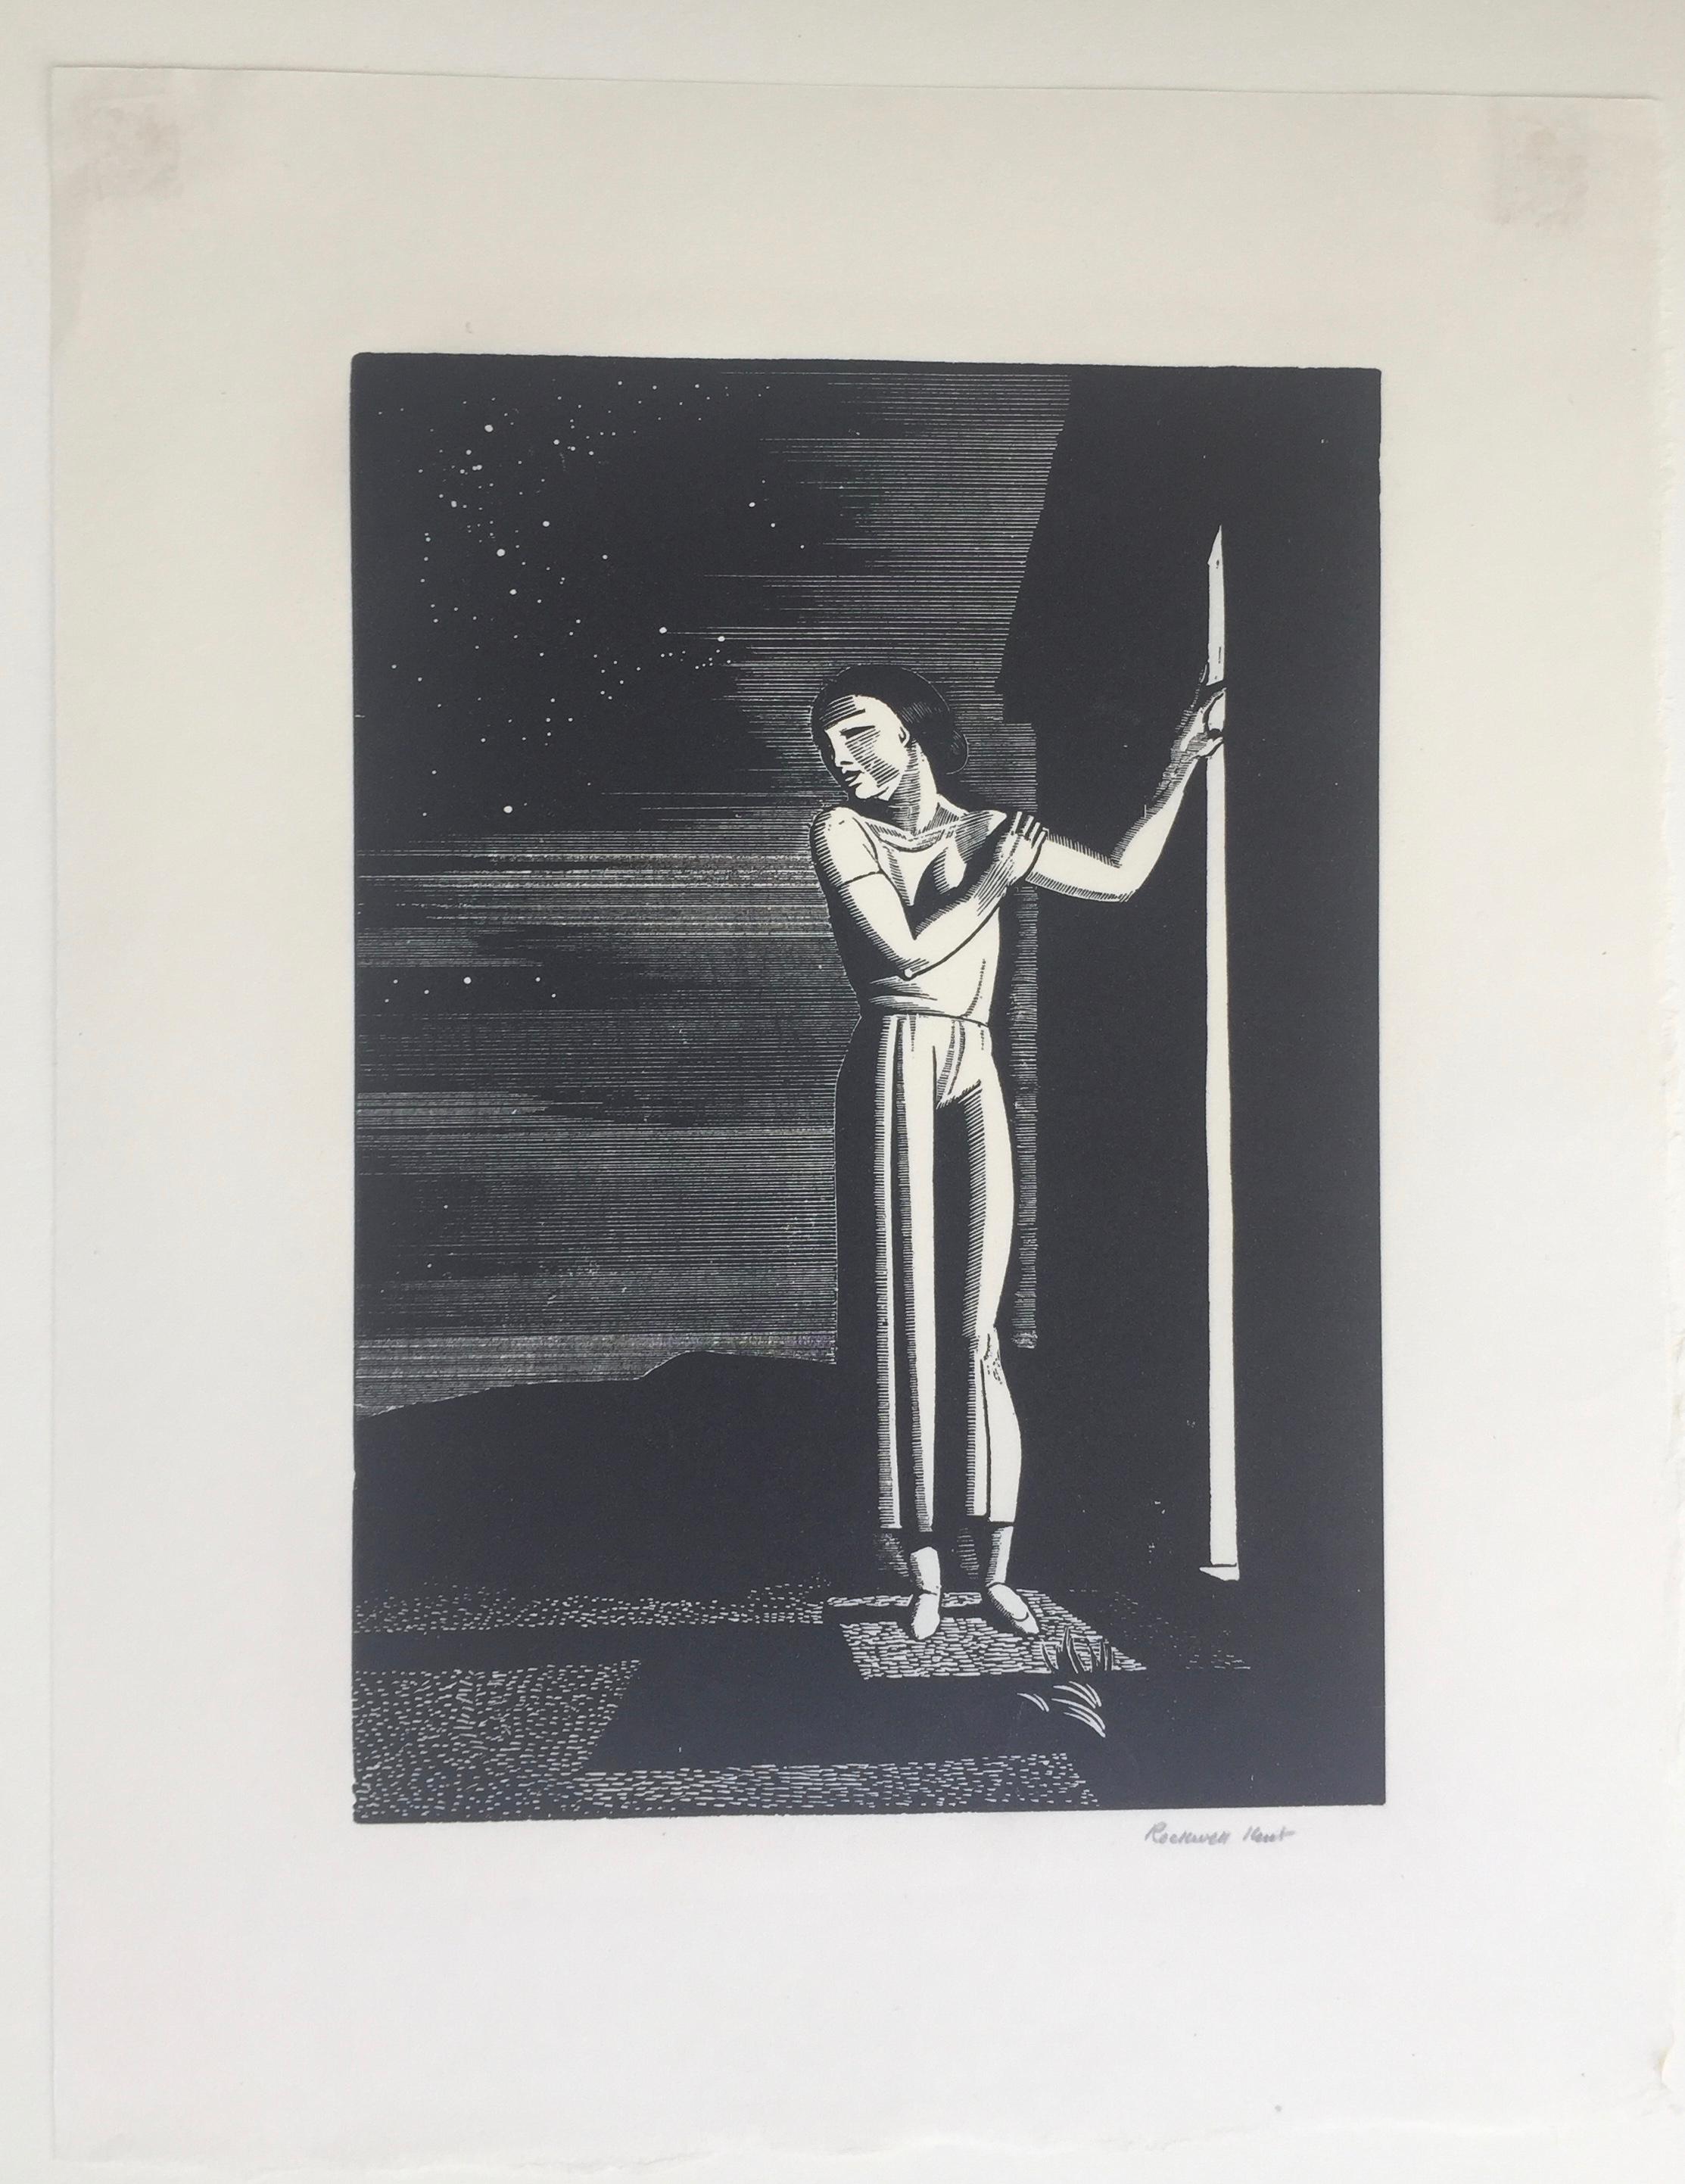 STARRY NIGHT - Print by Rockwell Kent